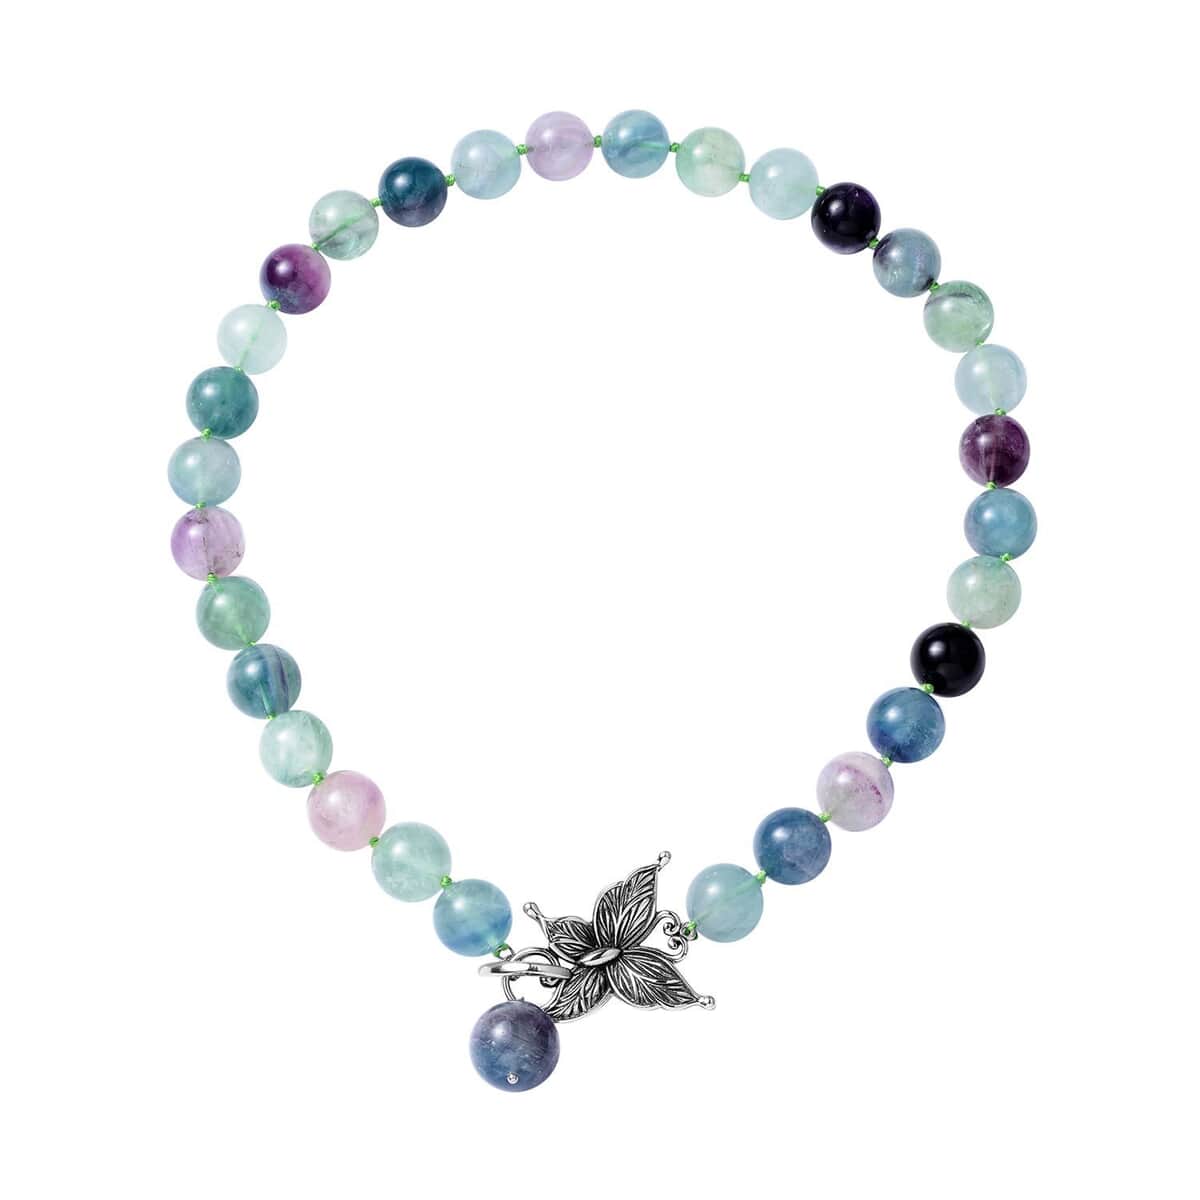 Premium Multi Fluorite 13-17mm Beaded Necklace 20 Inches with Butterfly Front Toggle Lock in Stainless Steel 792.00 ctw image number 0